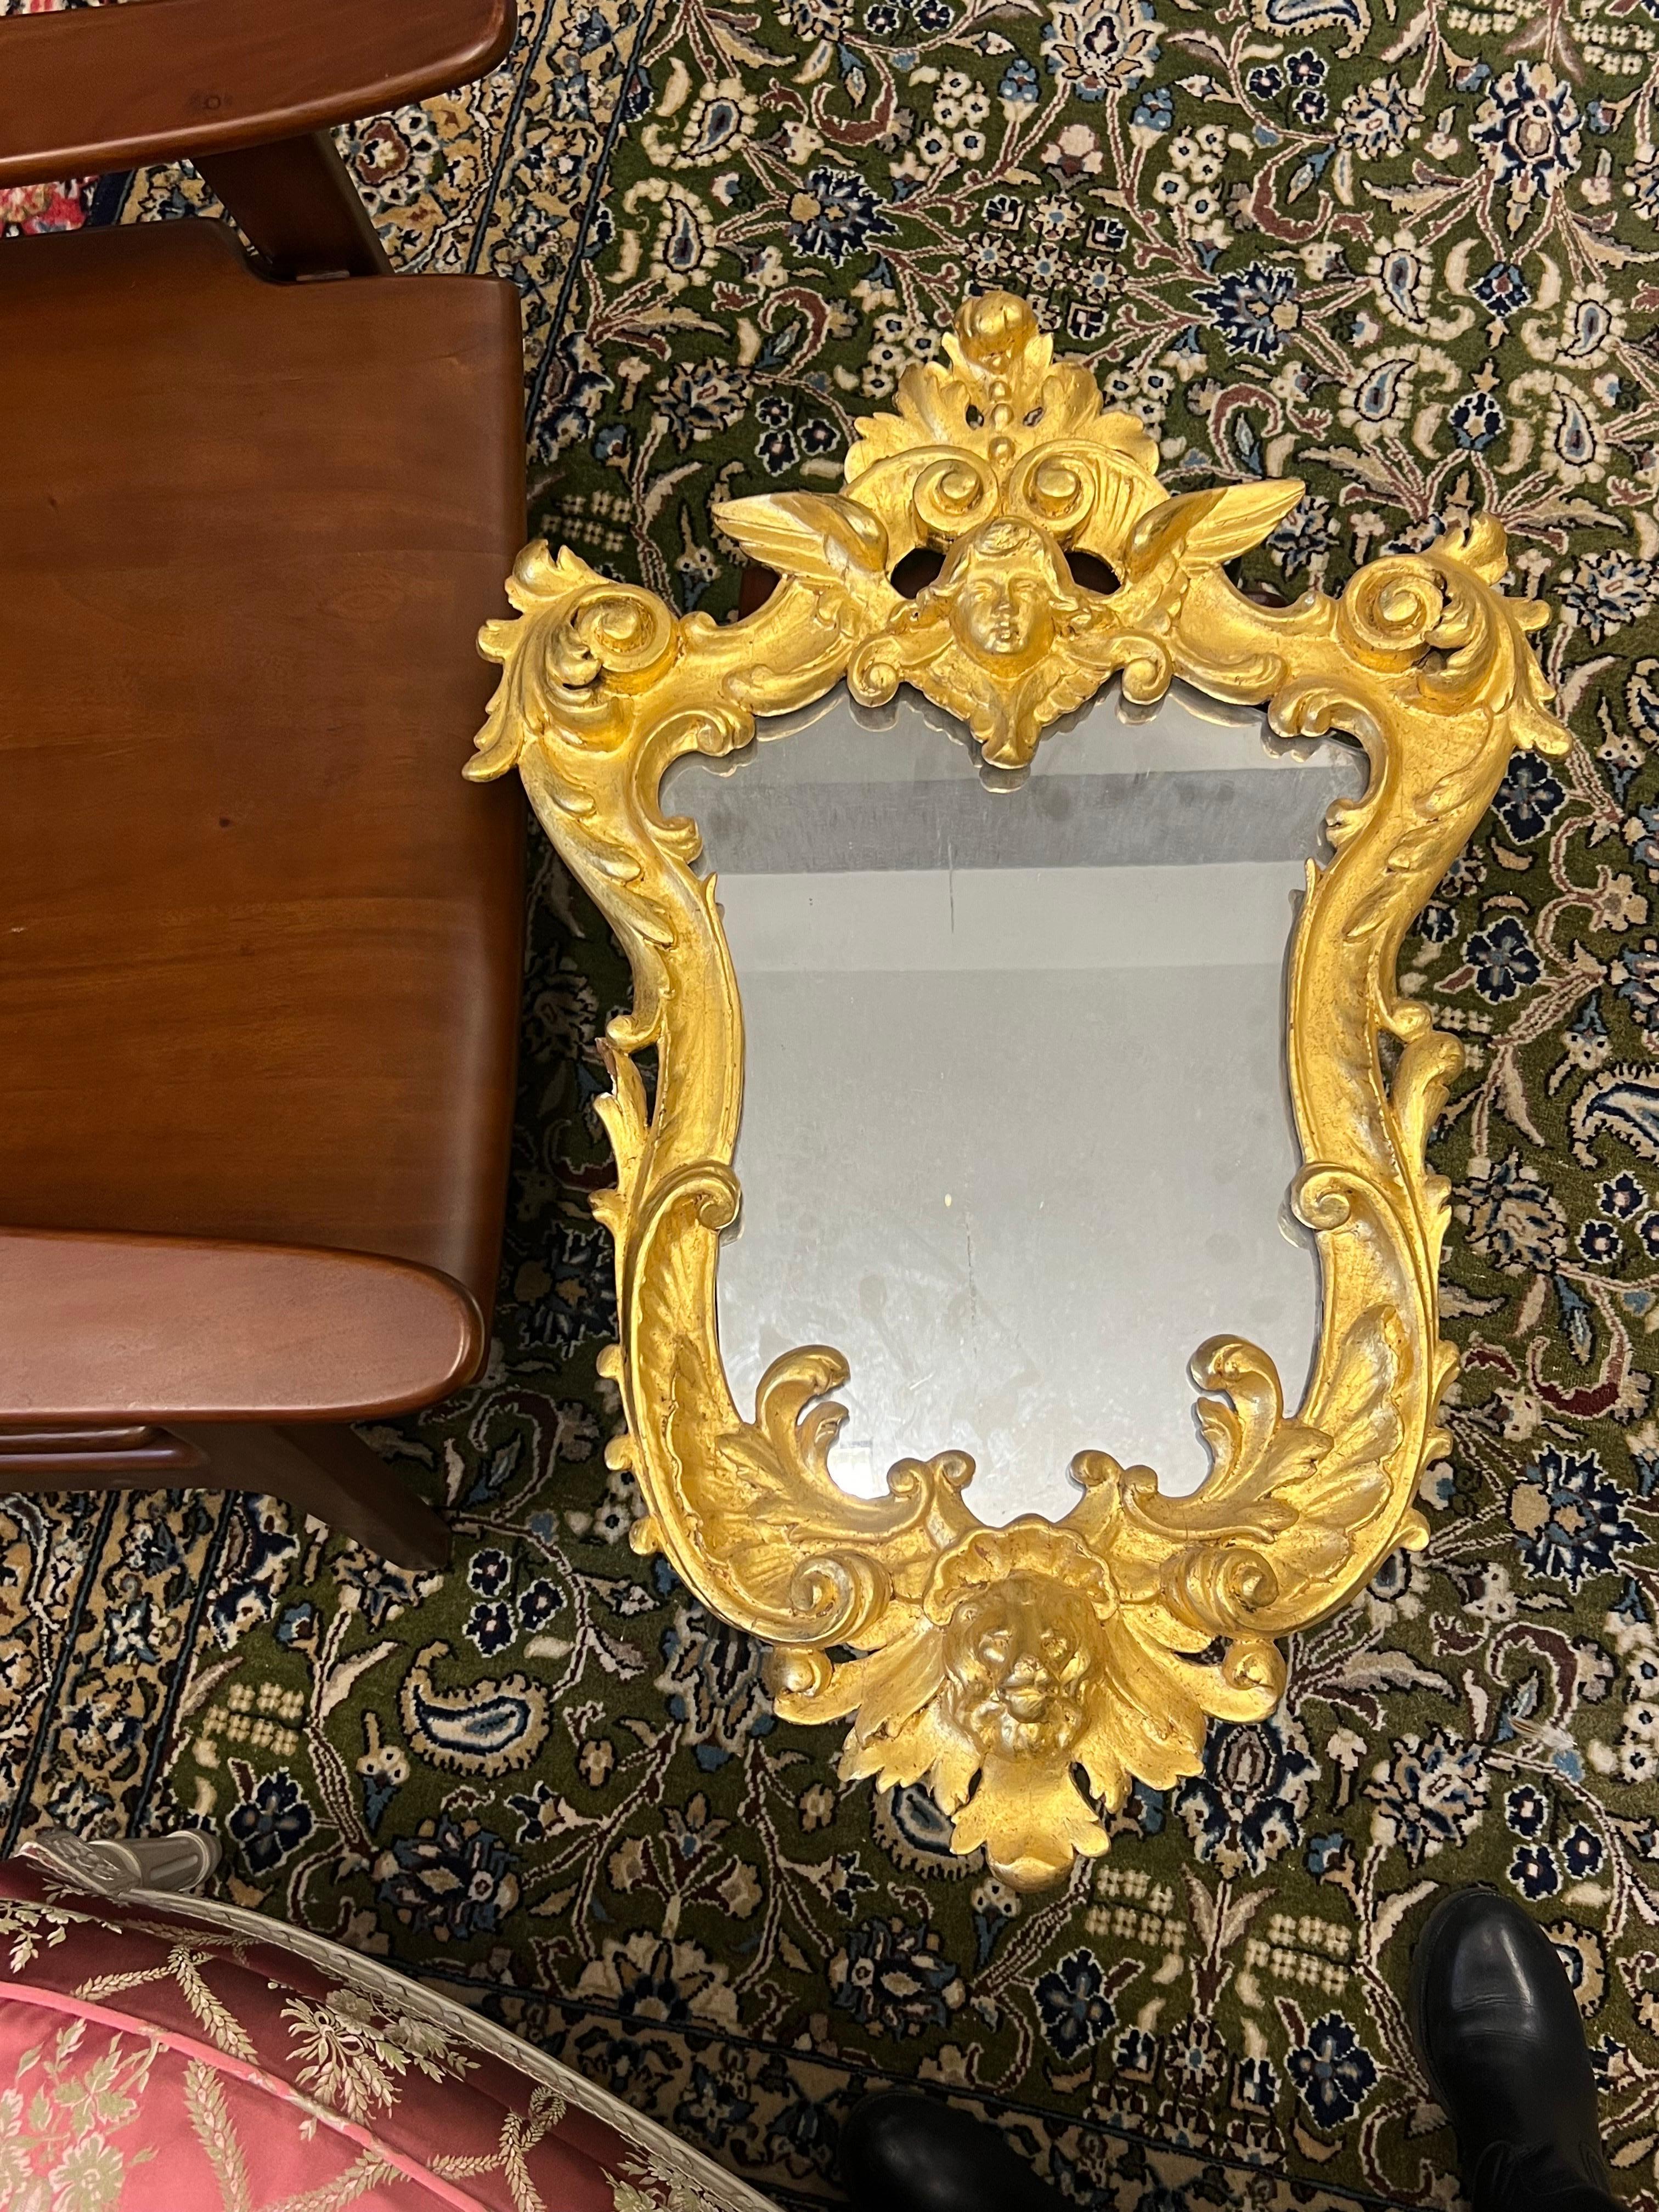 19th Century French gilt wood hand carved wall mirror in Louis XV style decorated with an angel and a lion head. Original condition without restaurations.
France, circa 1880
